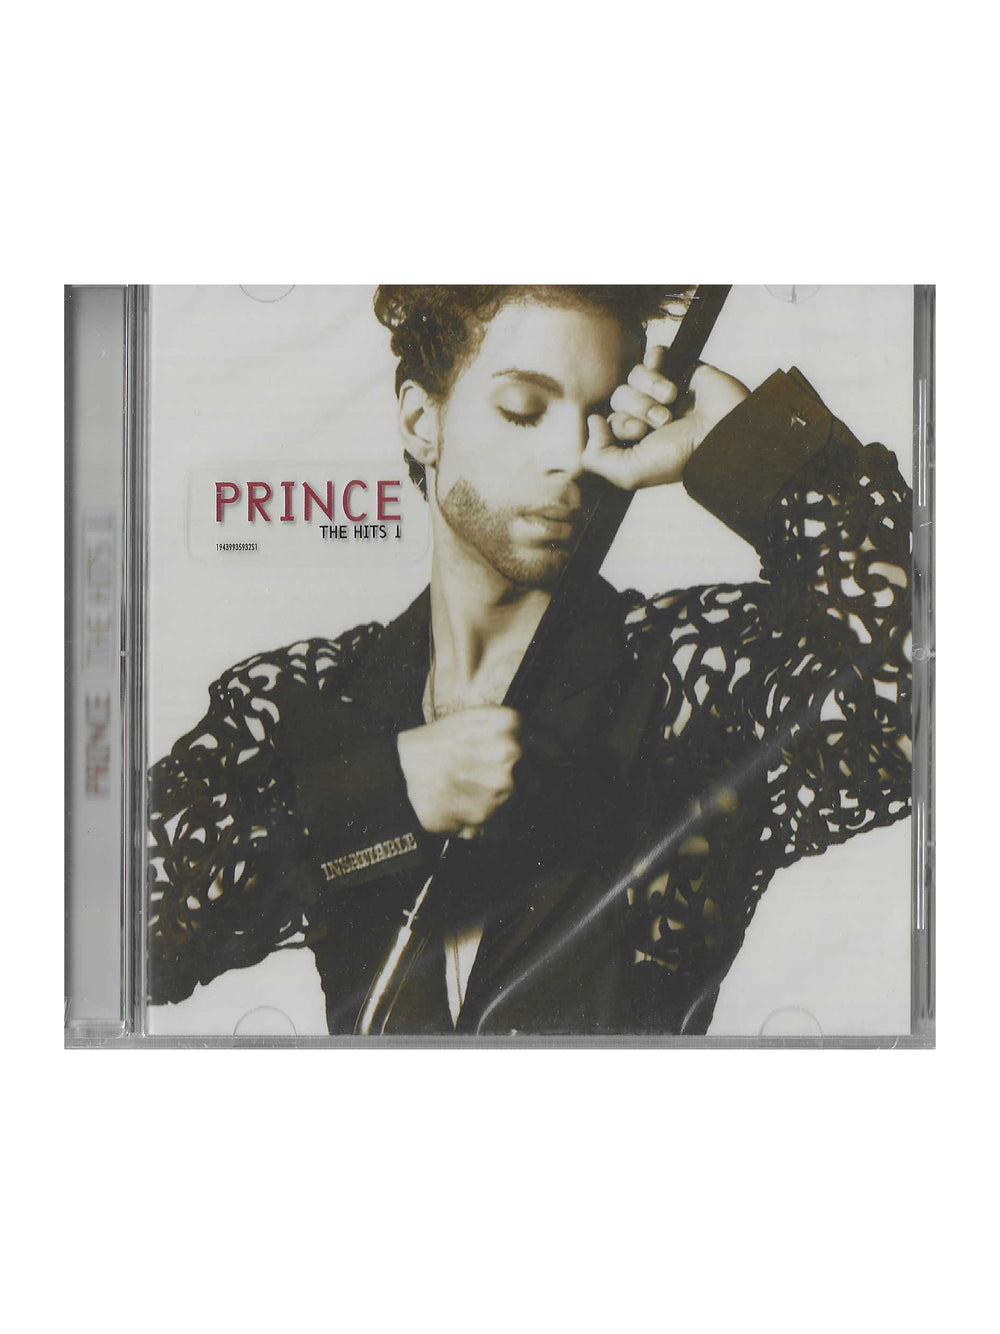 Prince – Hits 1 CD Compact Disc Reissue 2022 Sony Legacy NPG Records